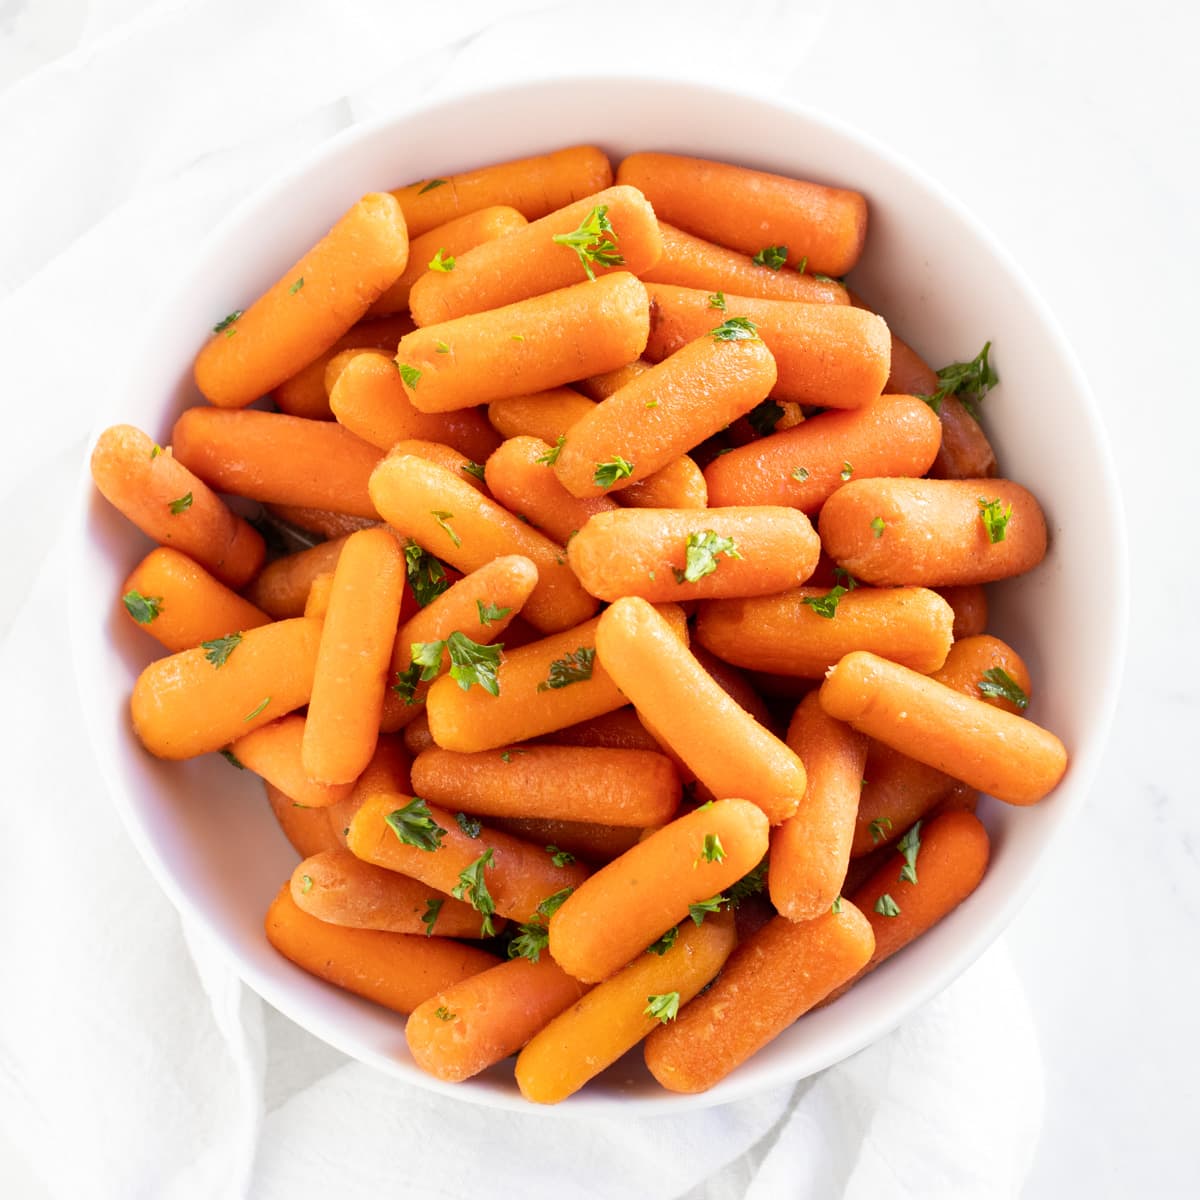 A bowl of cooked carrots topped with chopped fresh parsley.